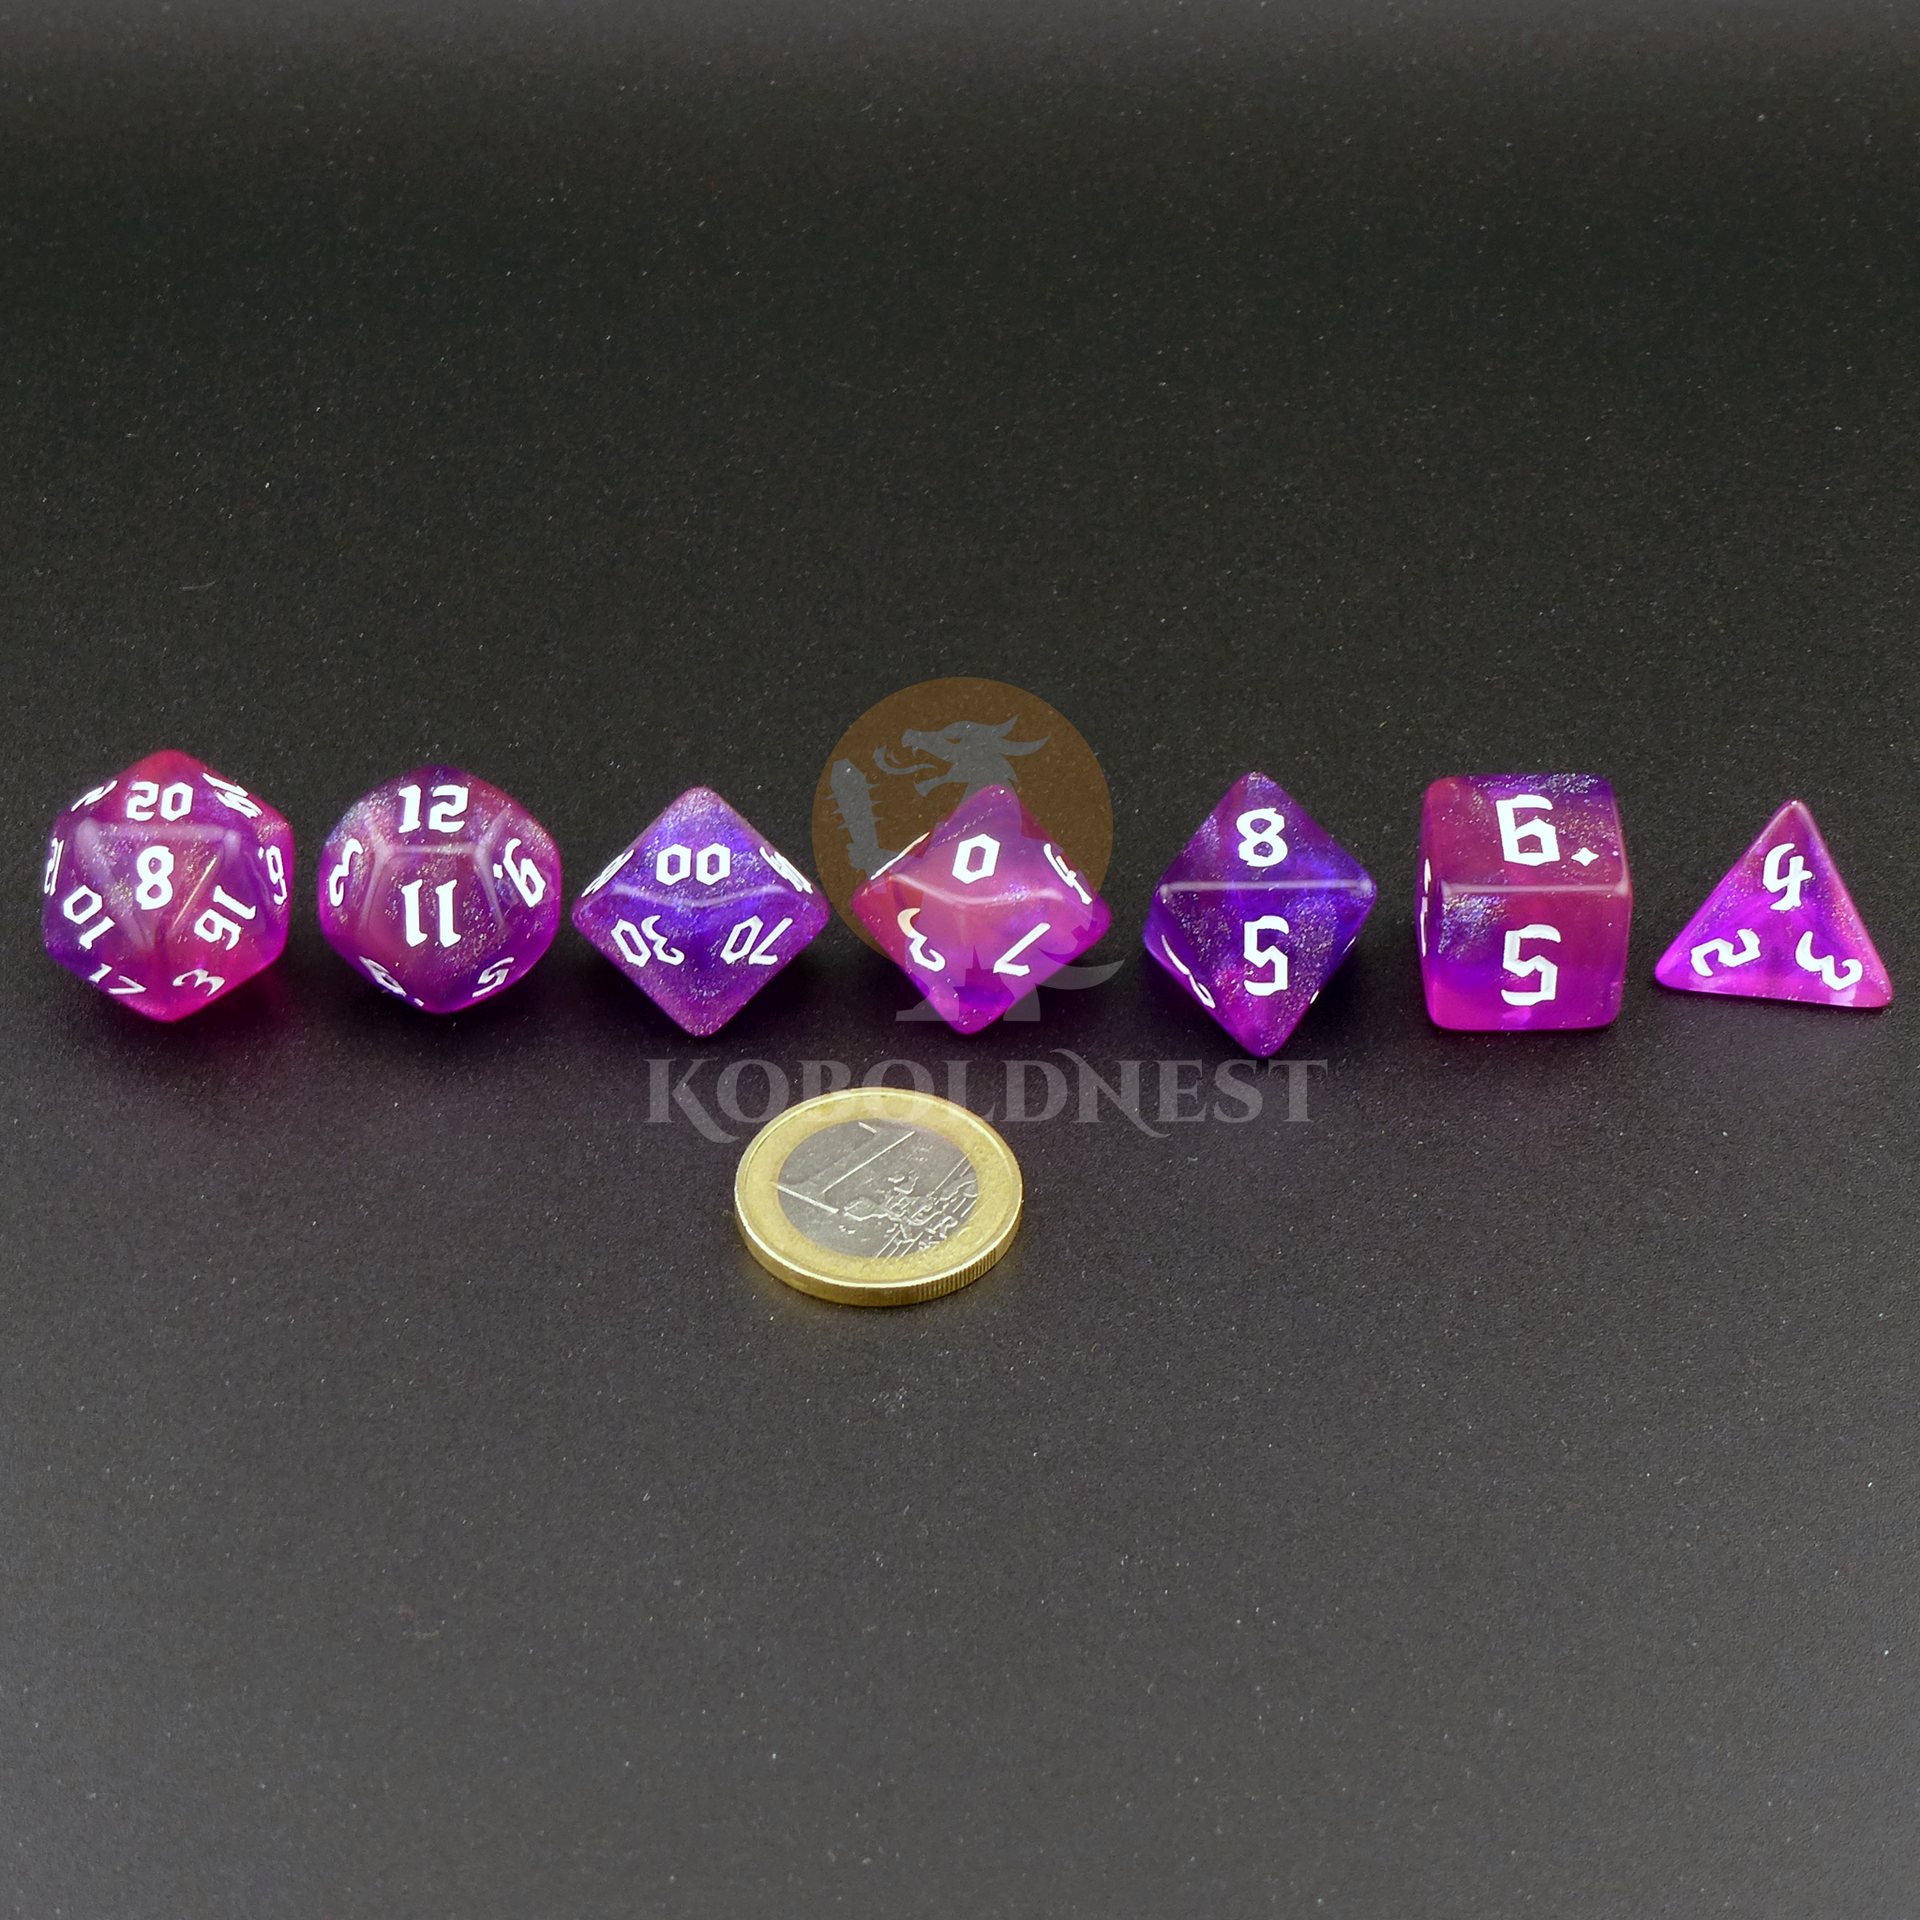 Dice_Polyhedral_Set_Standard_Purple-Clear-Glitter_Line_Scale.png